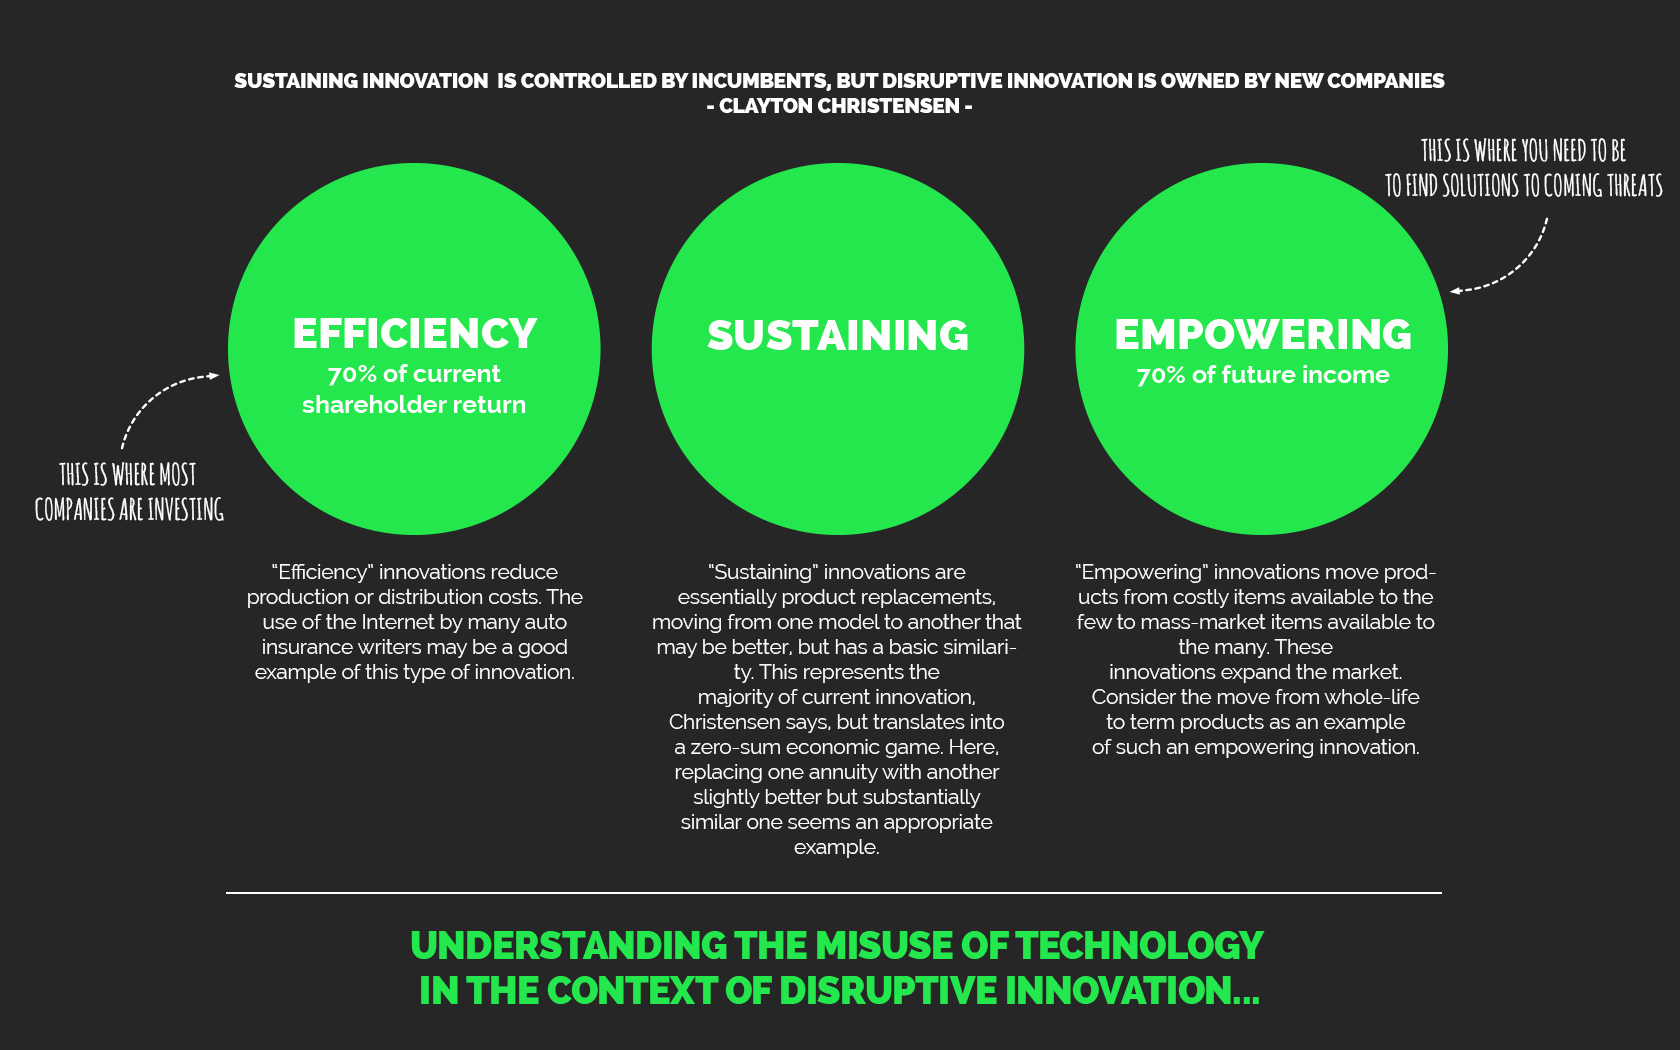 understanding-the-misuse-of-technology-in-the-context-of-disruptive-innovation-clayton-christensen